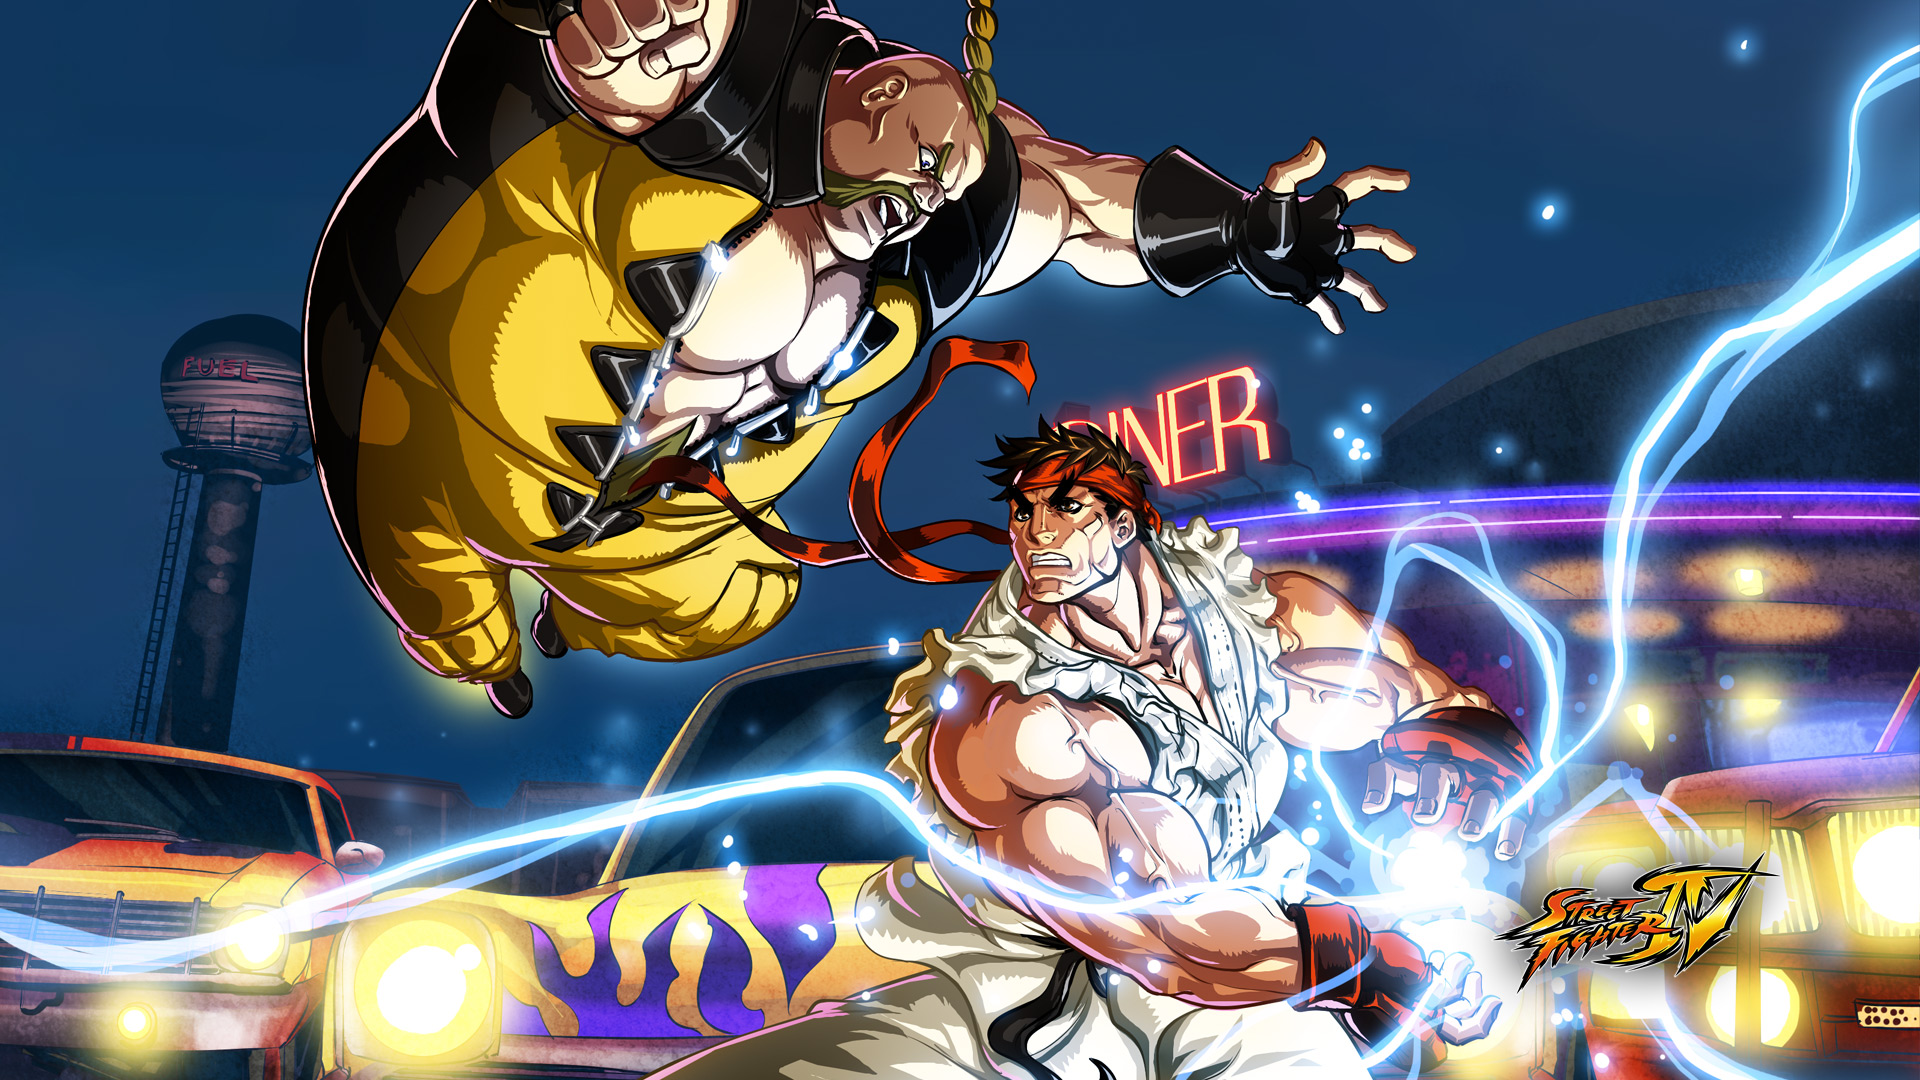 Download the Rufus Street Fighter Wallpaper, Rufus Street Fighter ...